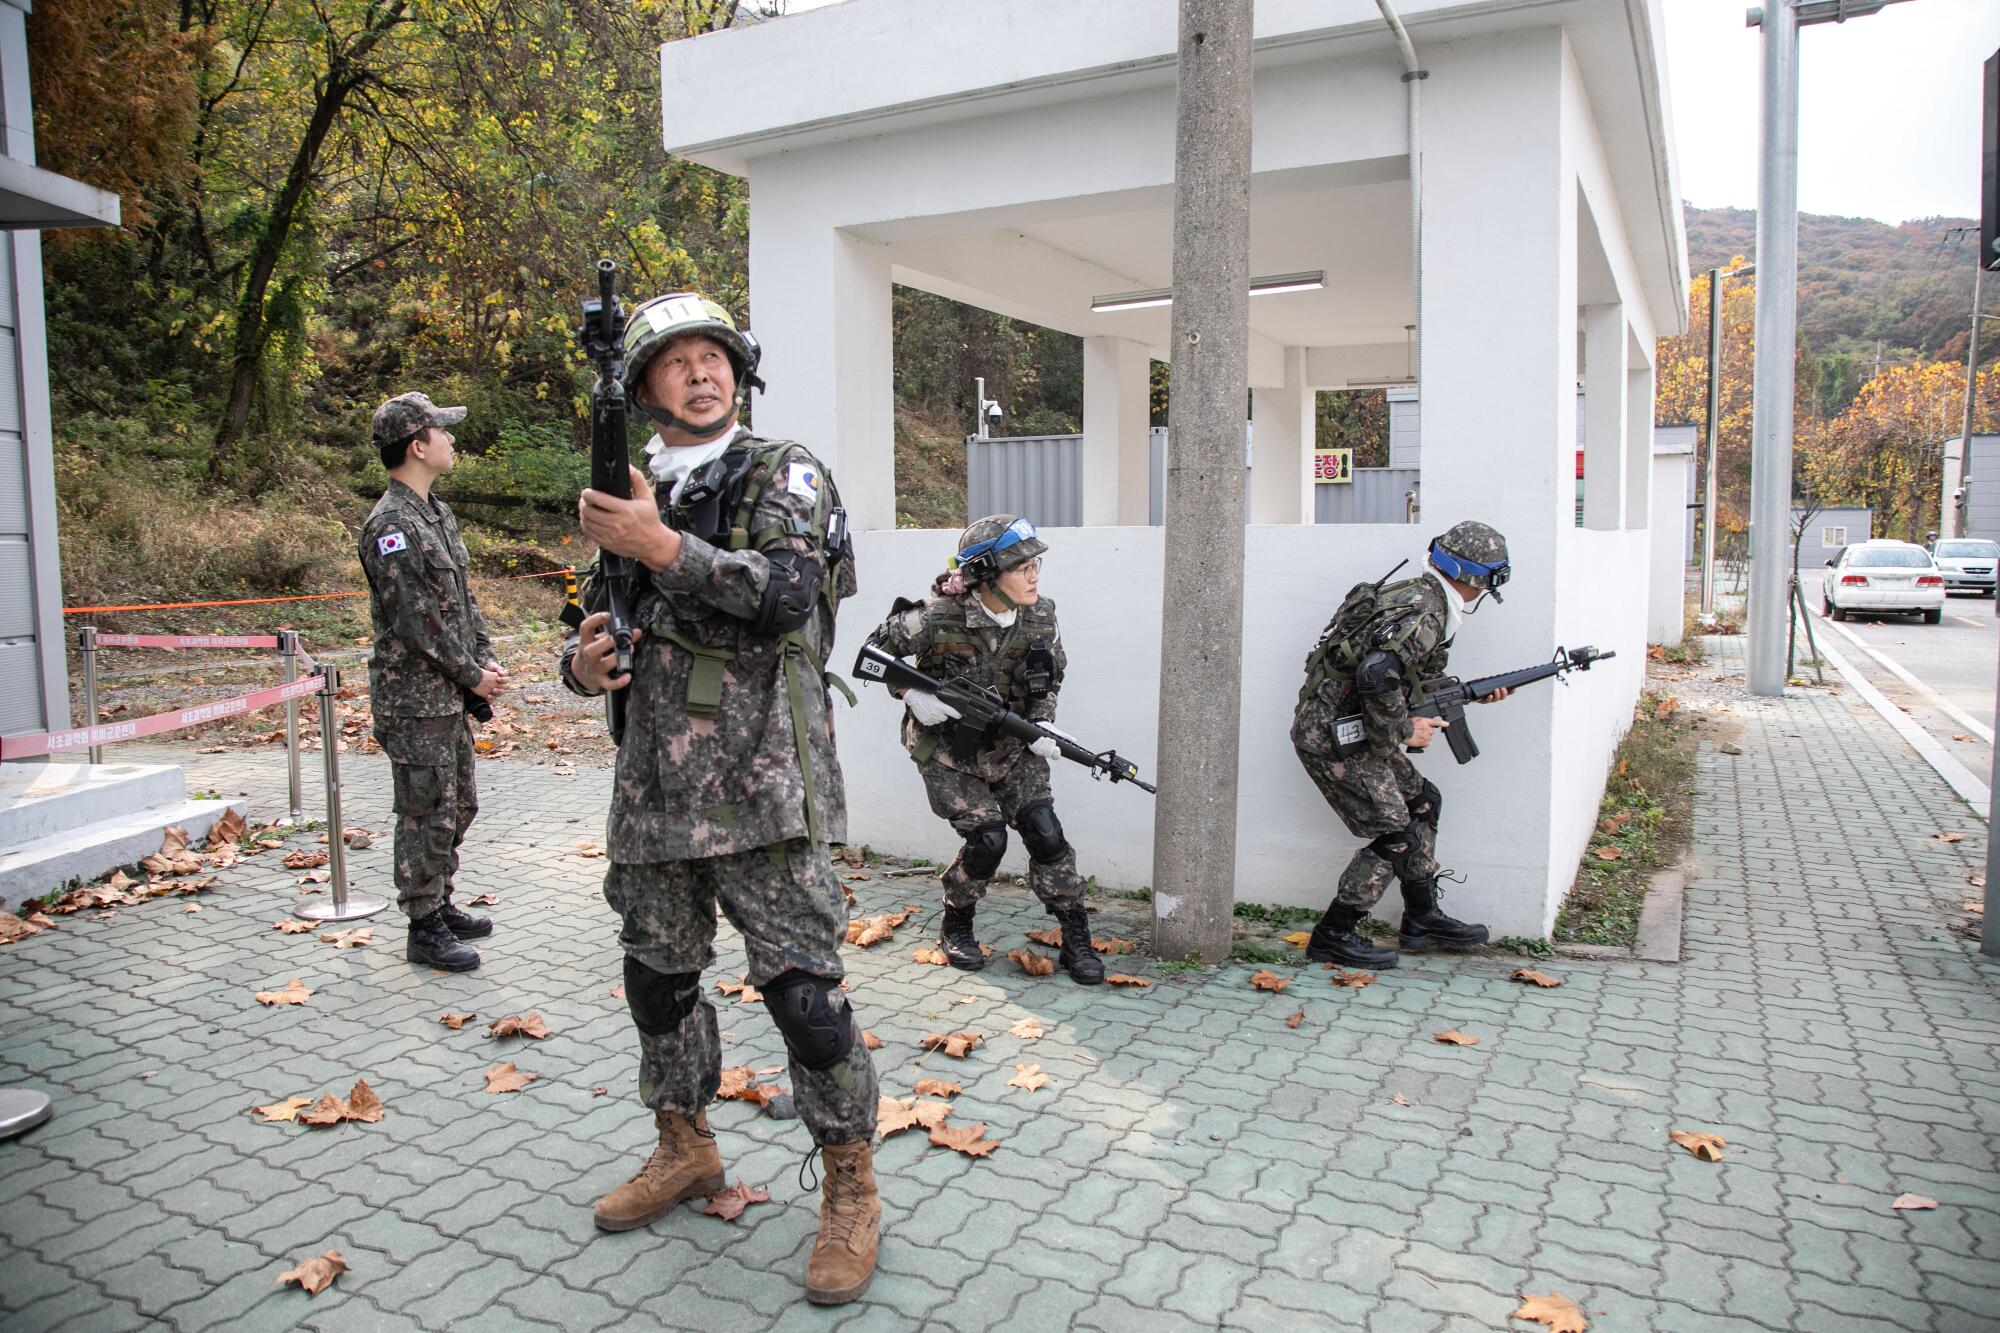 Members of the Senior Army participate in mock urban warfare during military training at the Infantry 